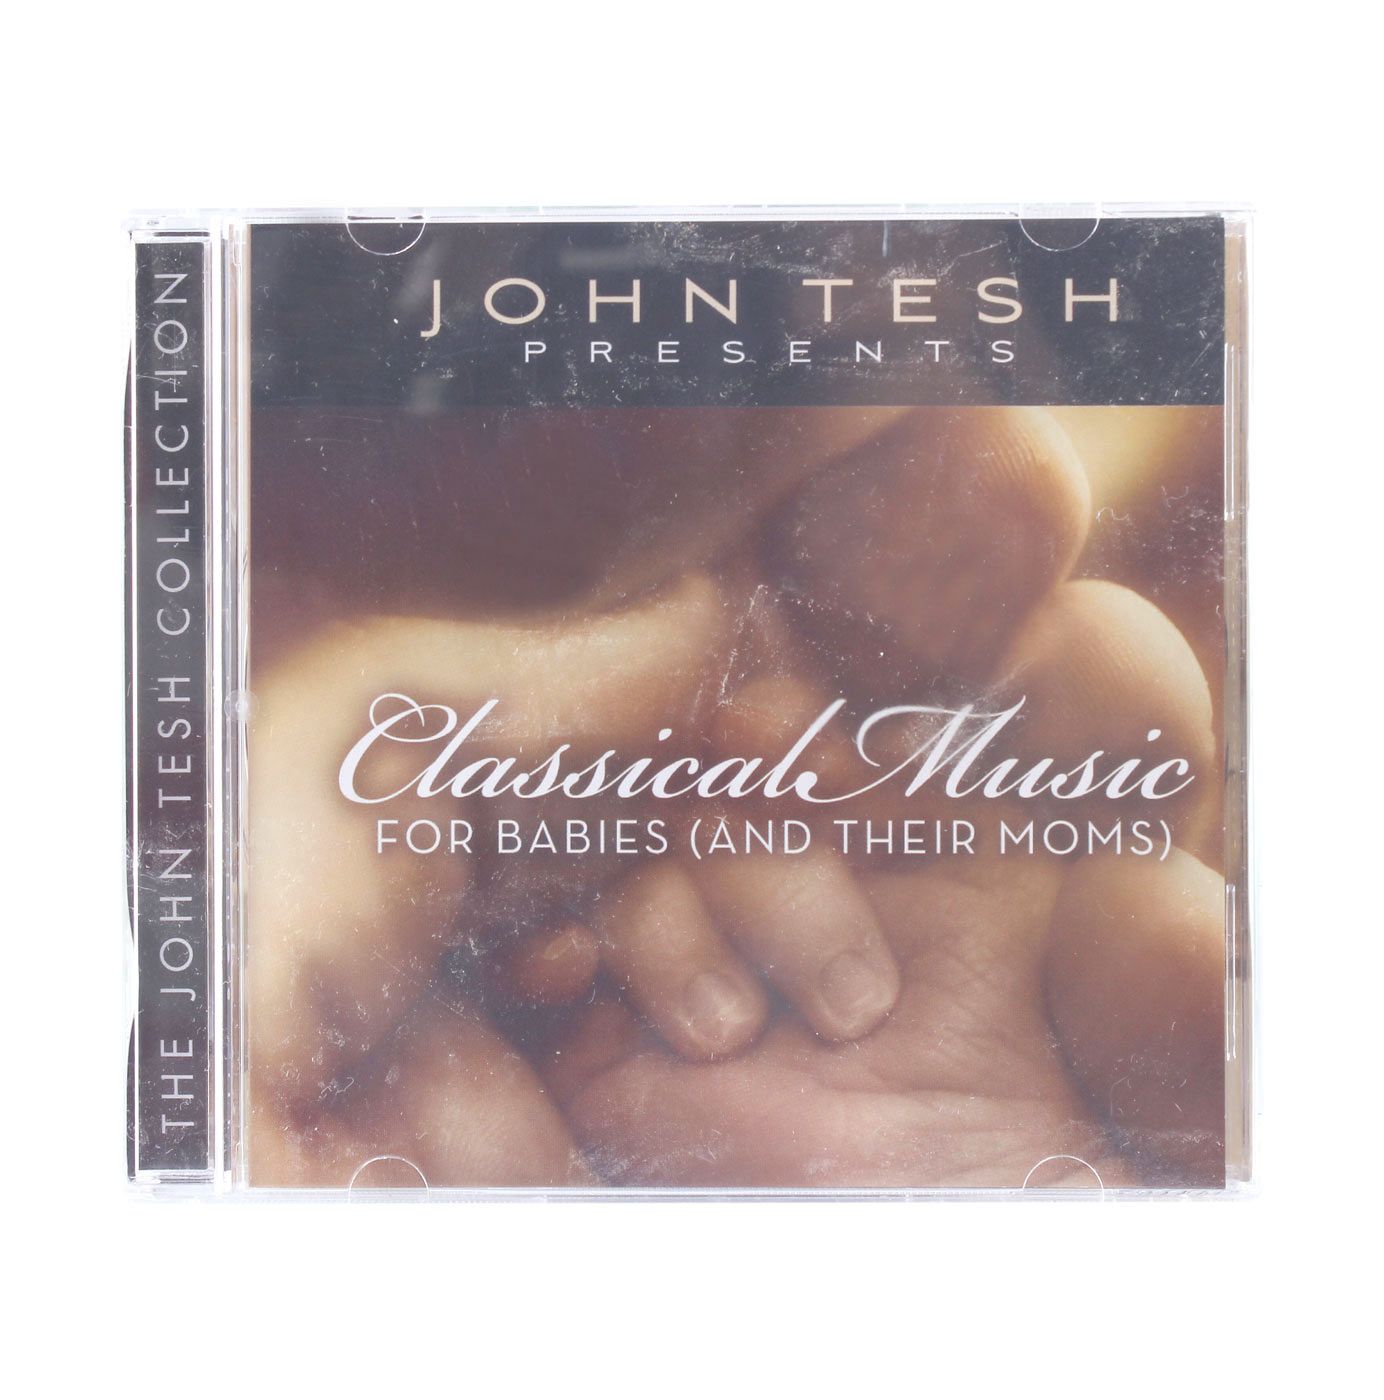 EMI CMG Classical Music For Babies And Their Moms Vol 1 - 1